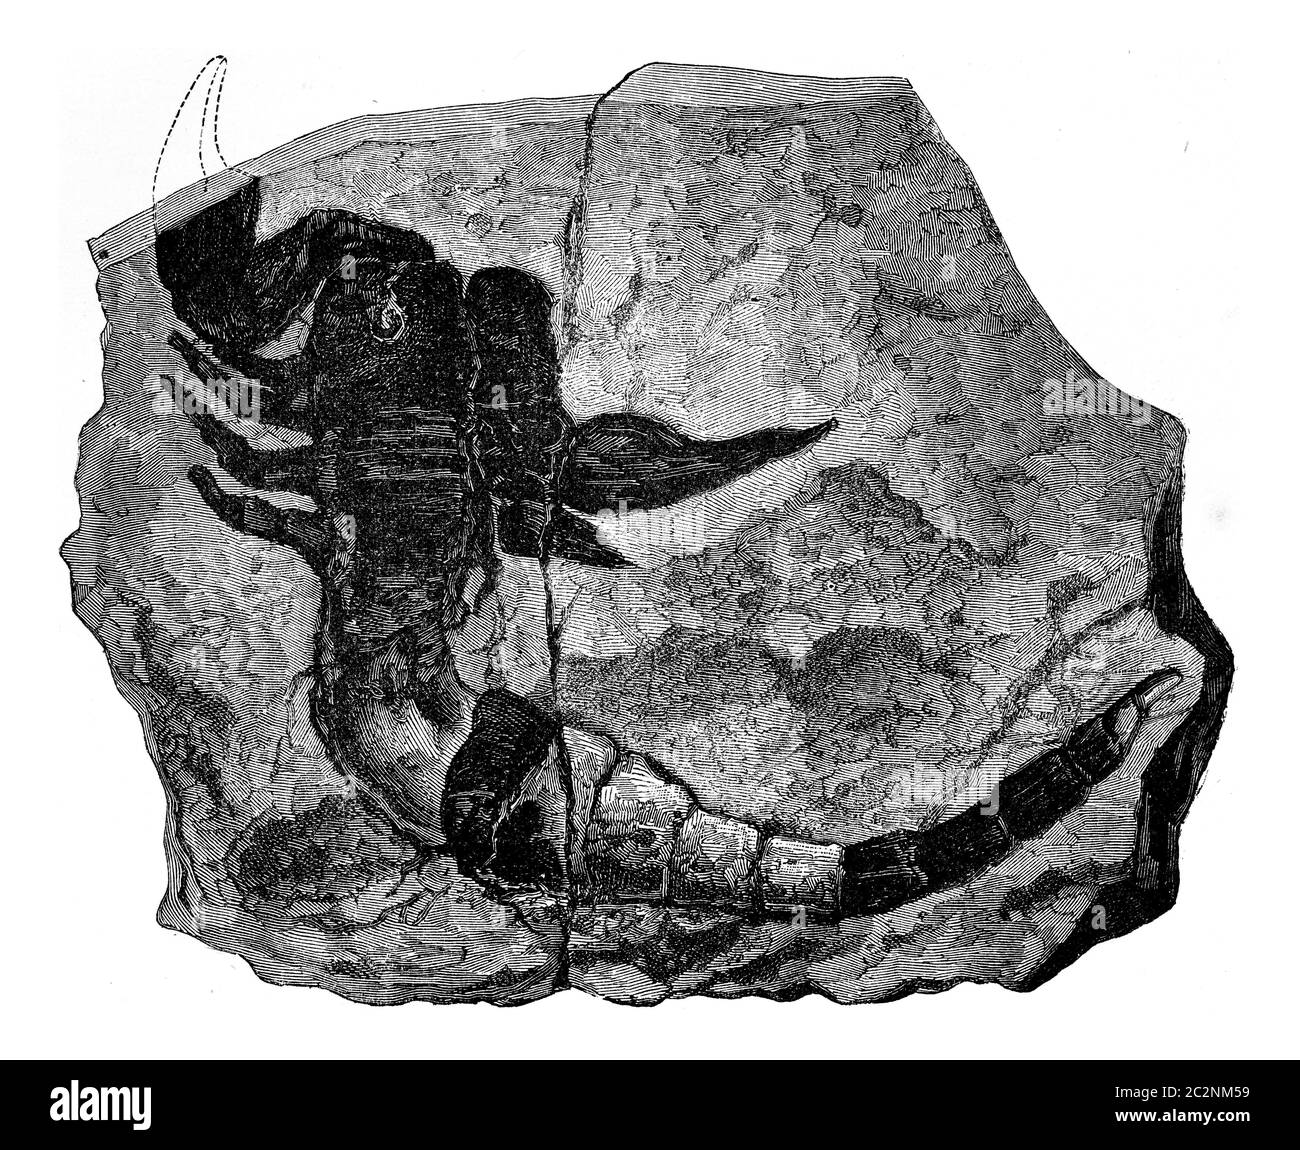 The oldest known land animal. Scorpion fossil found in 1884 in the Silurian, vintage engraved illustration. Earth before man – 1886. Stock Photo